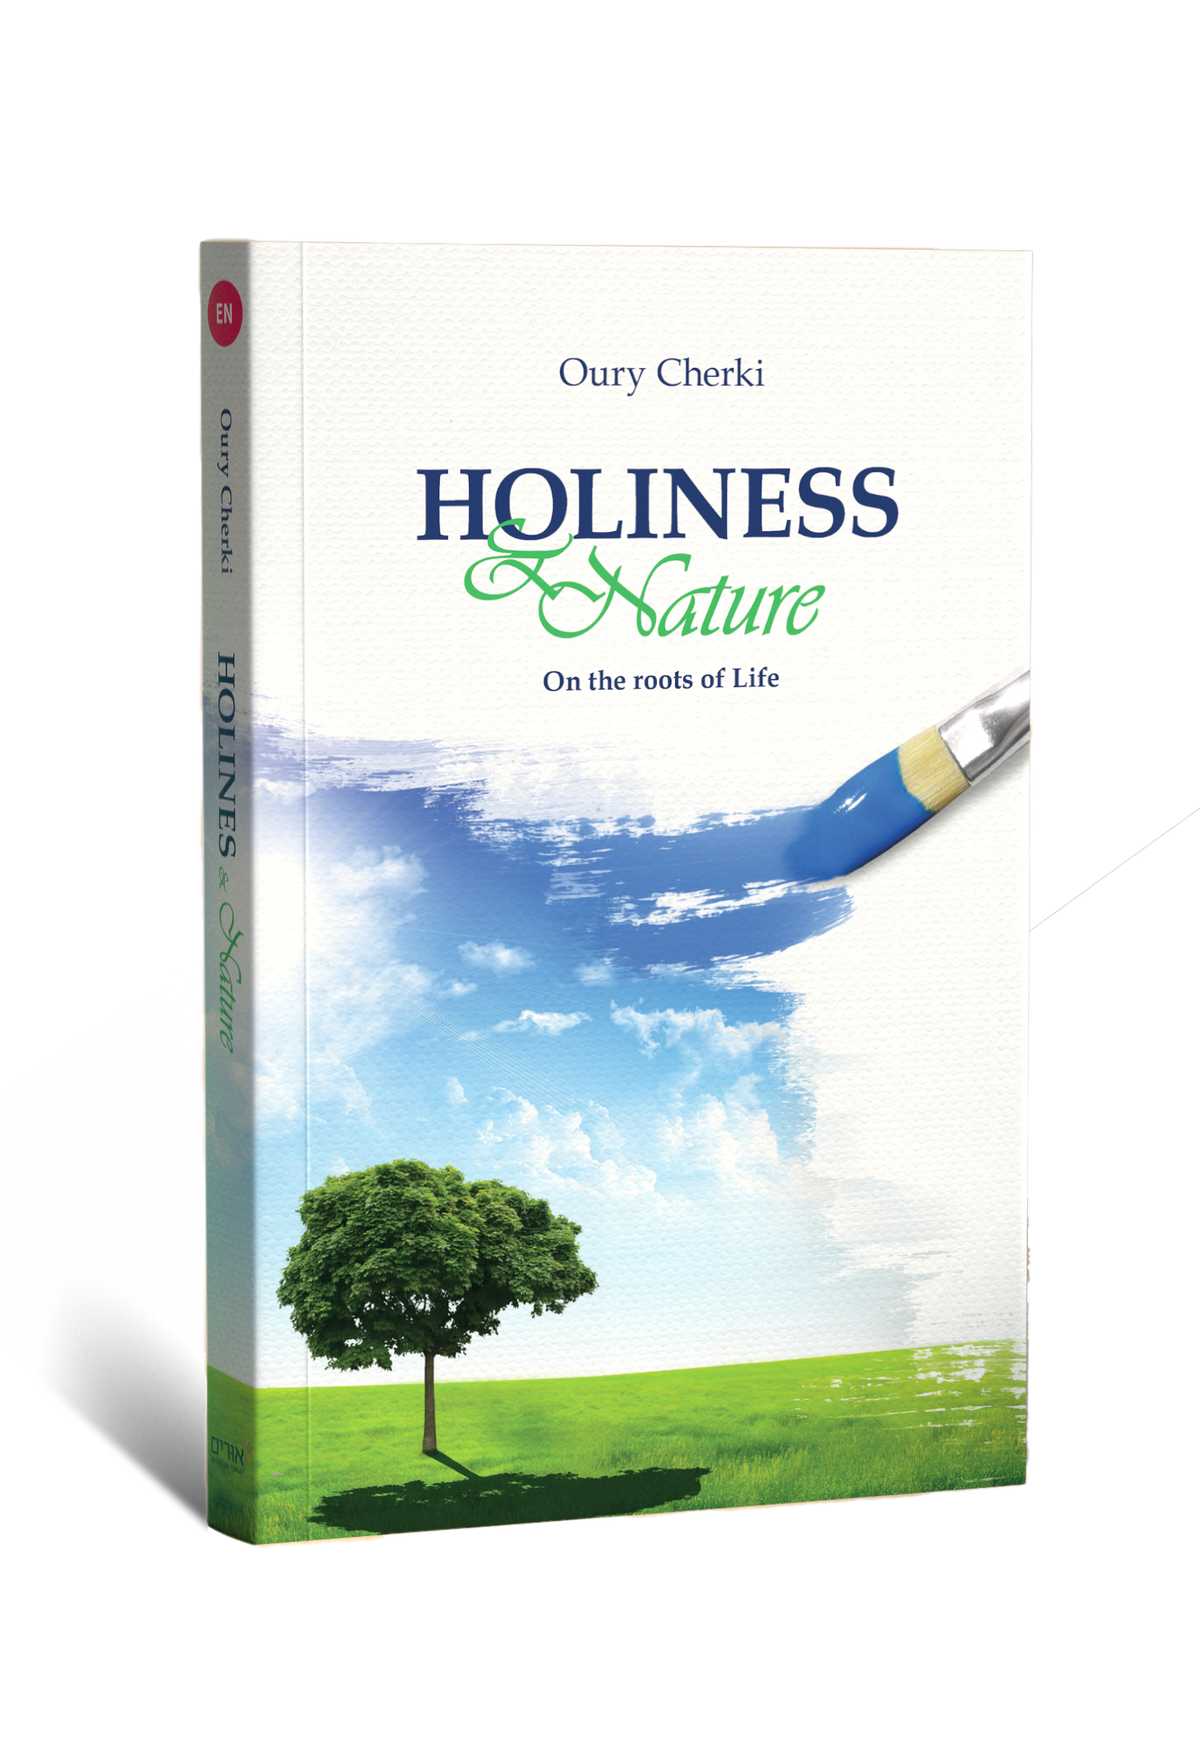 Holiness and Nature by Oury Cherki in English